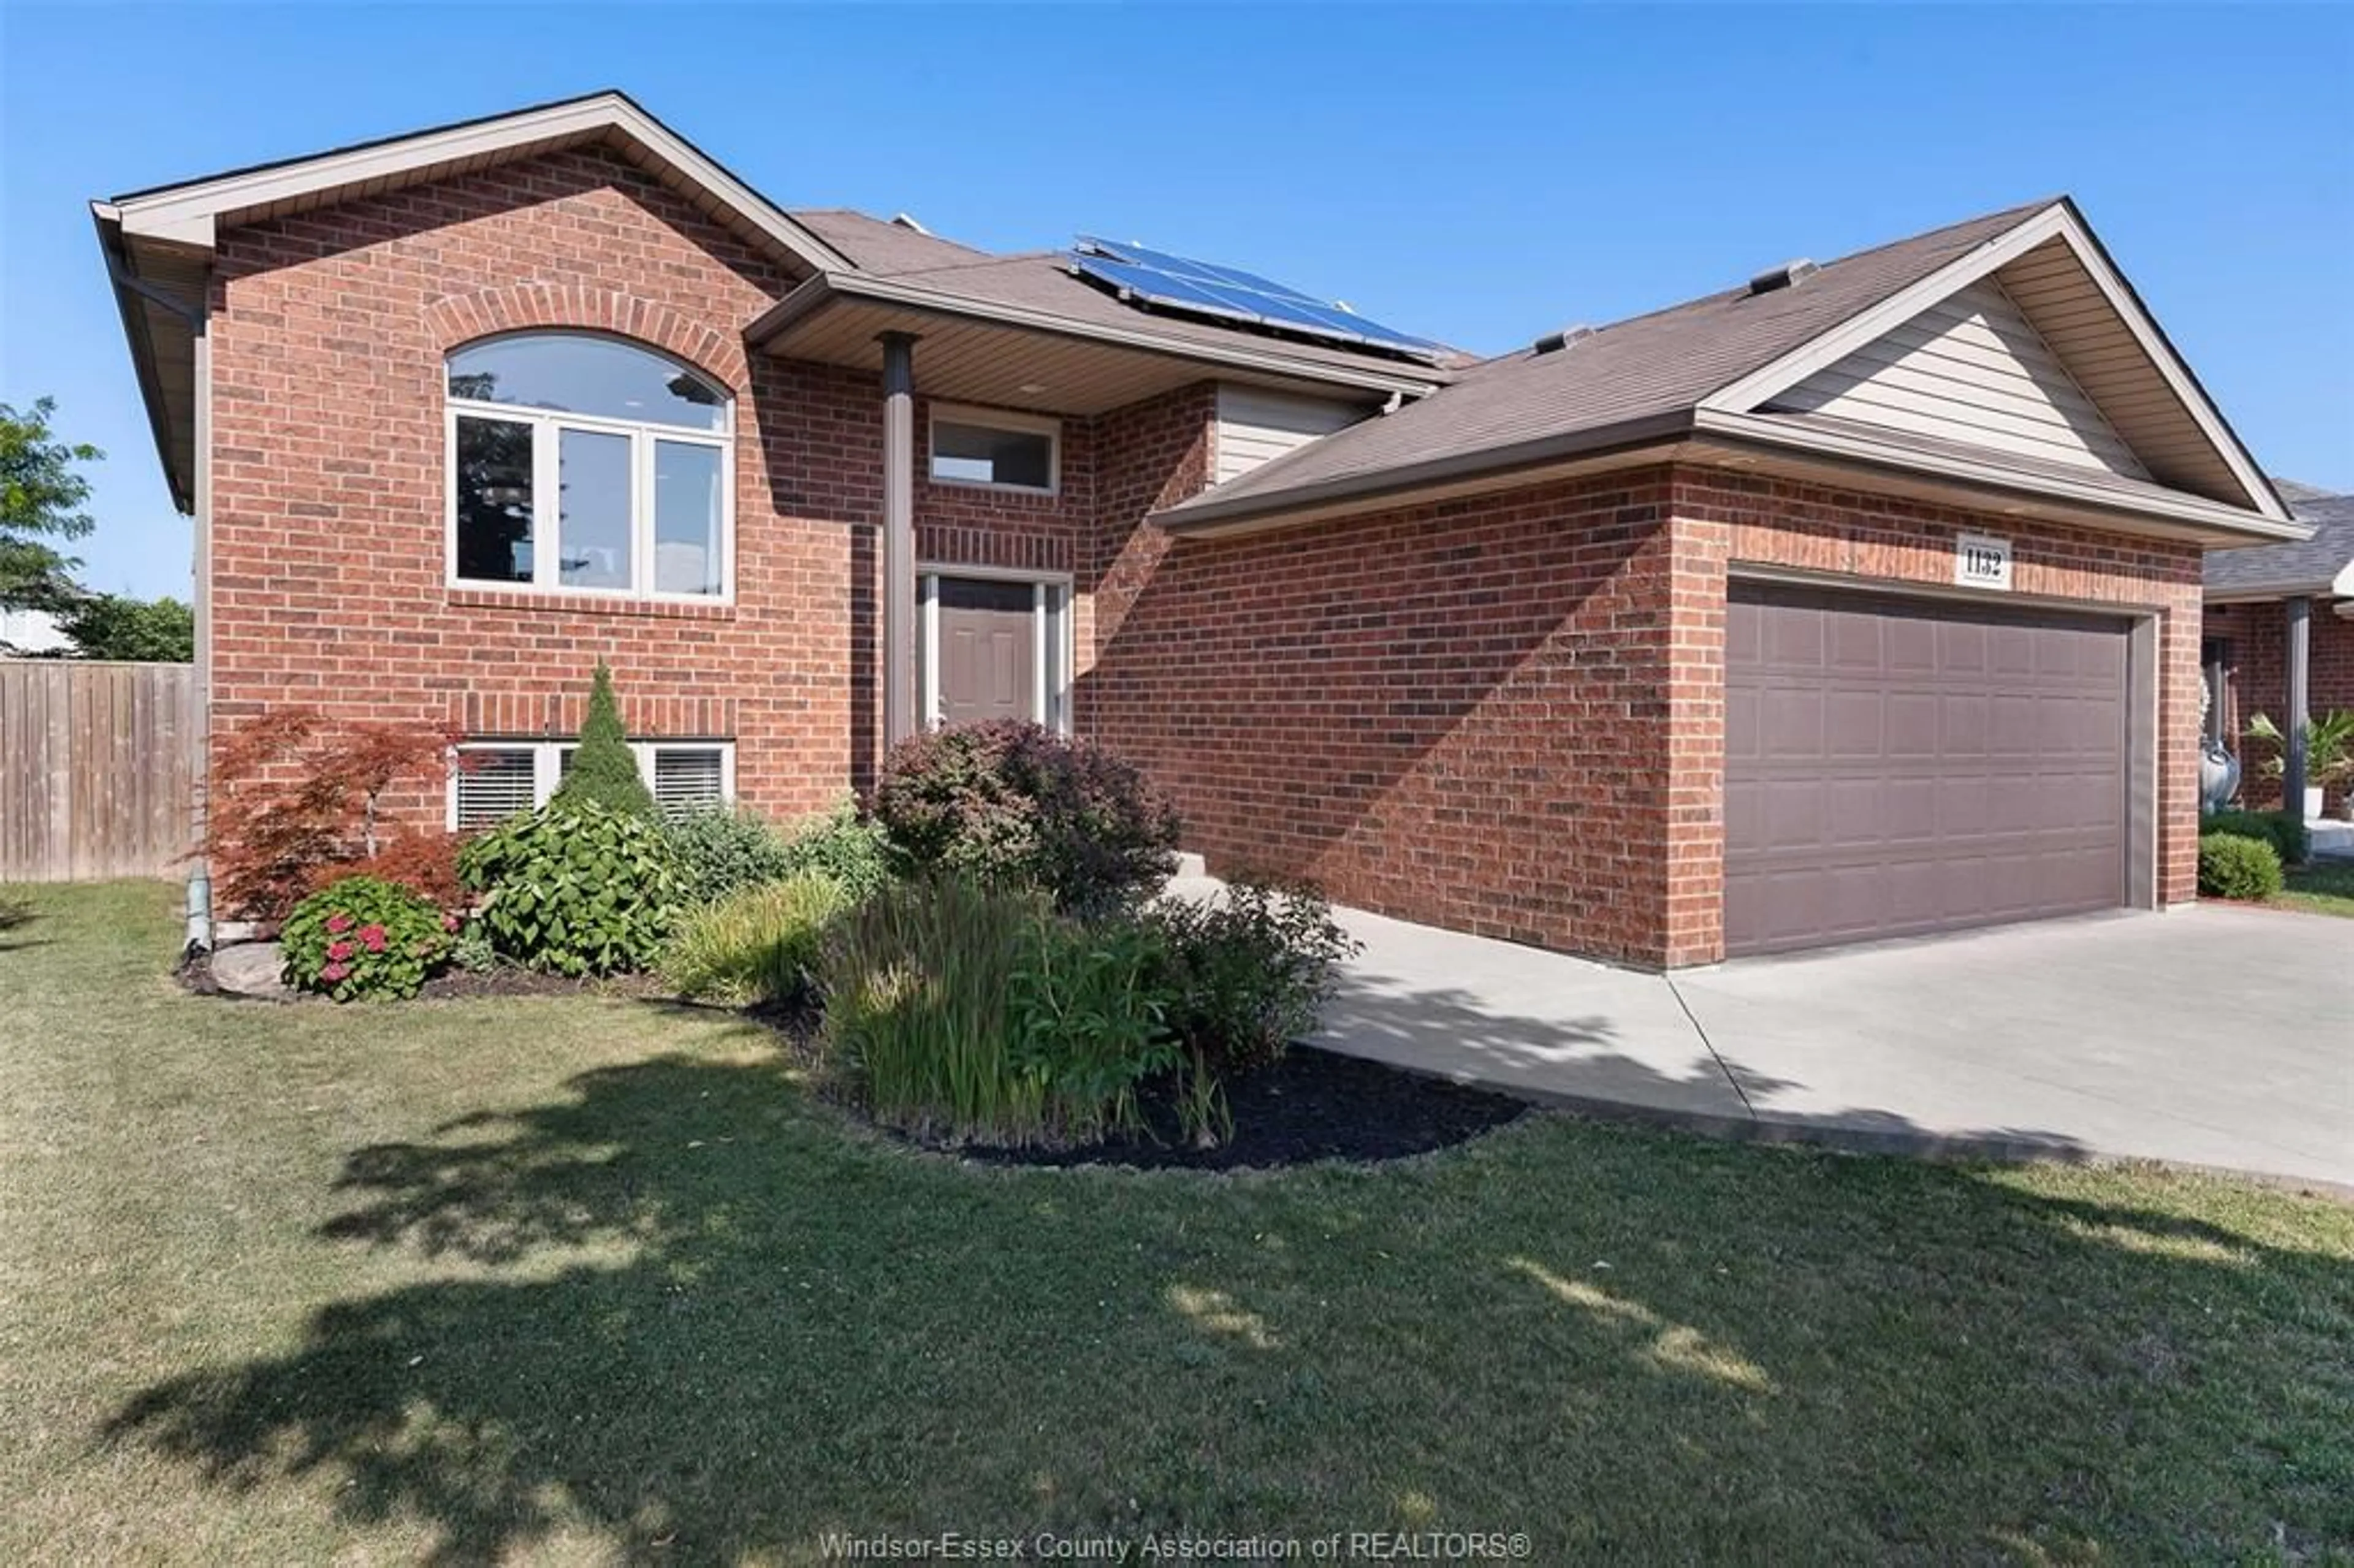 Home with brick exterior material for 1132 CLOVER Ave, Windsor Ontario N8P 1W1